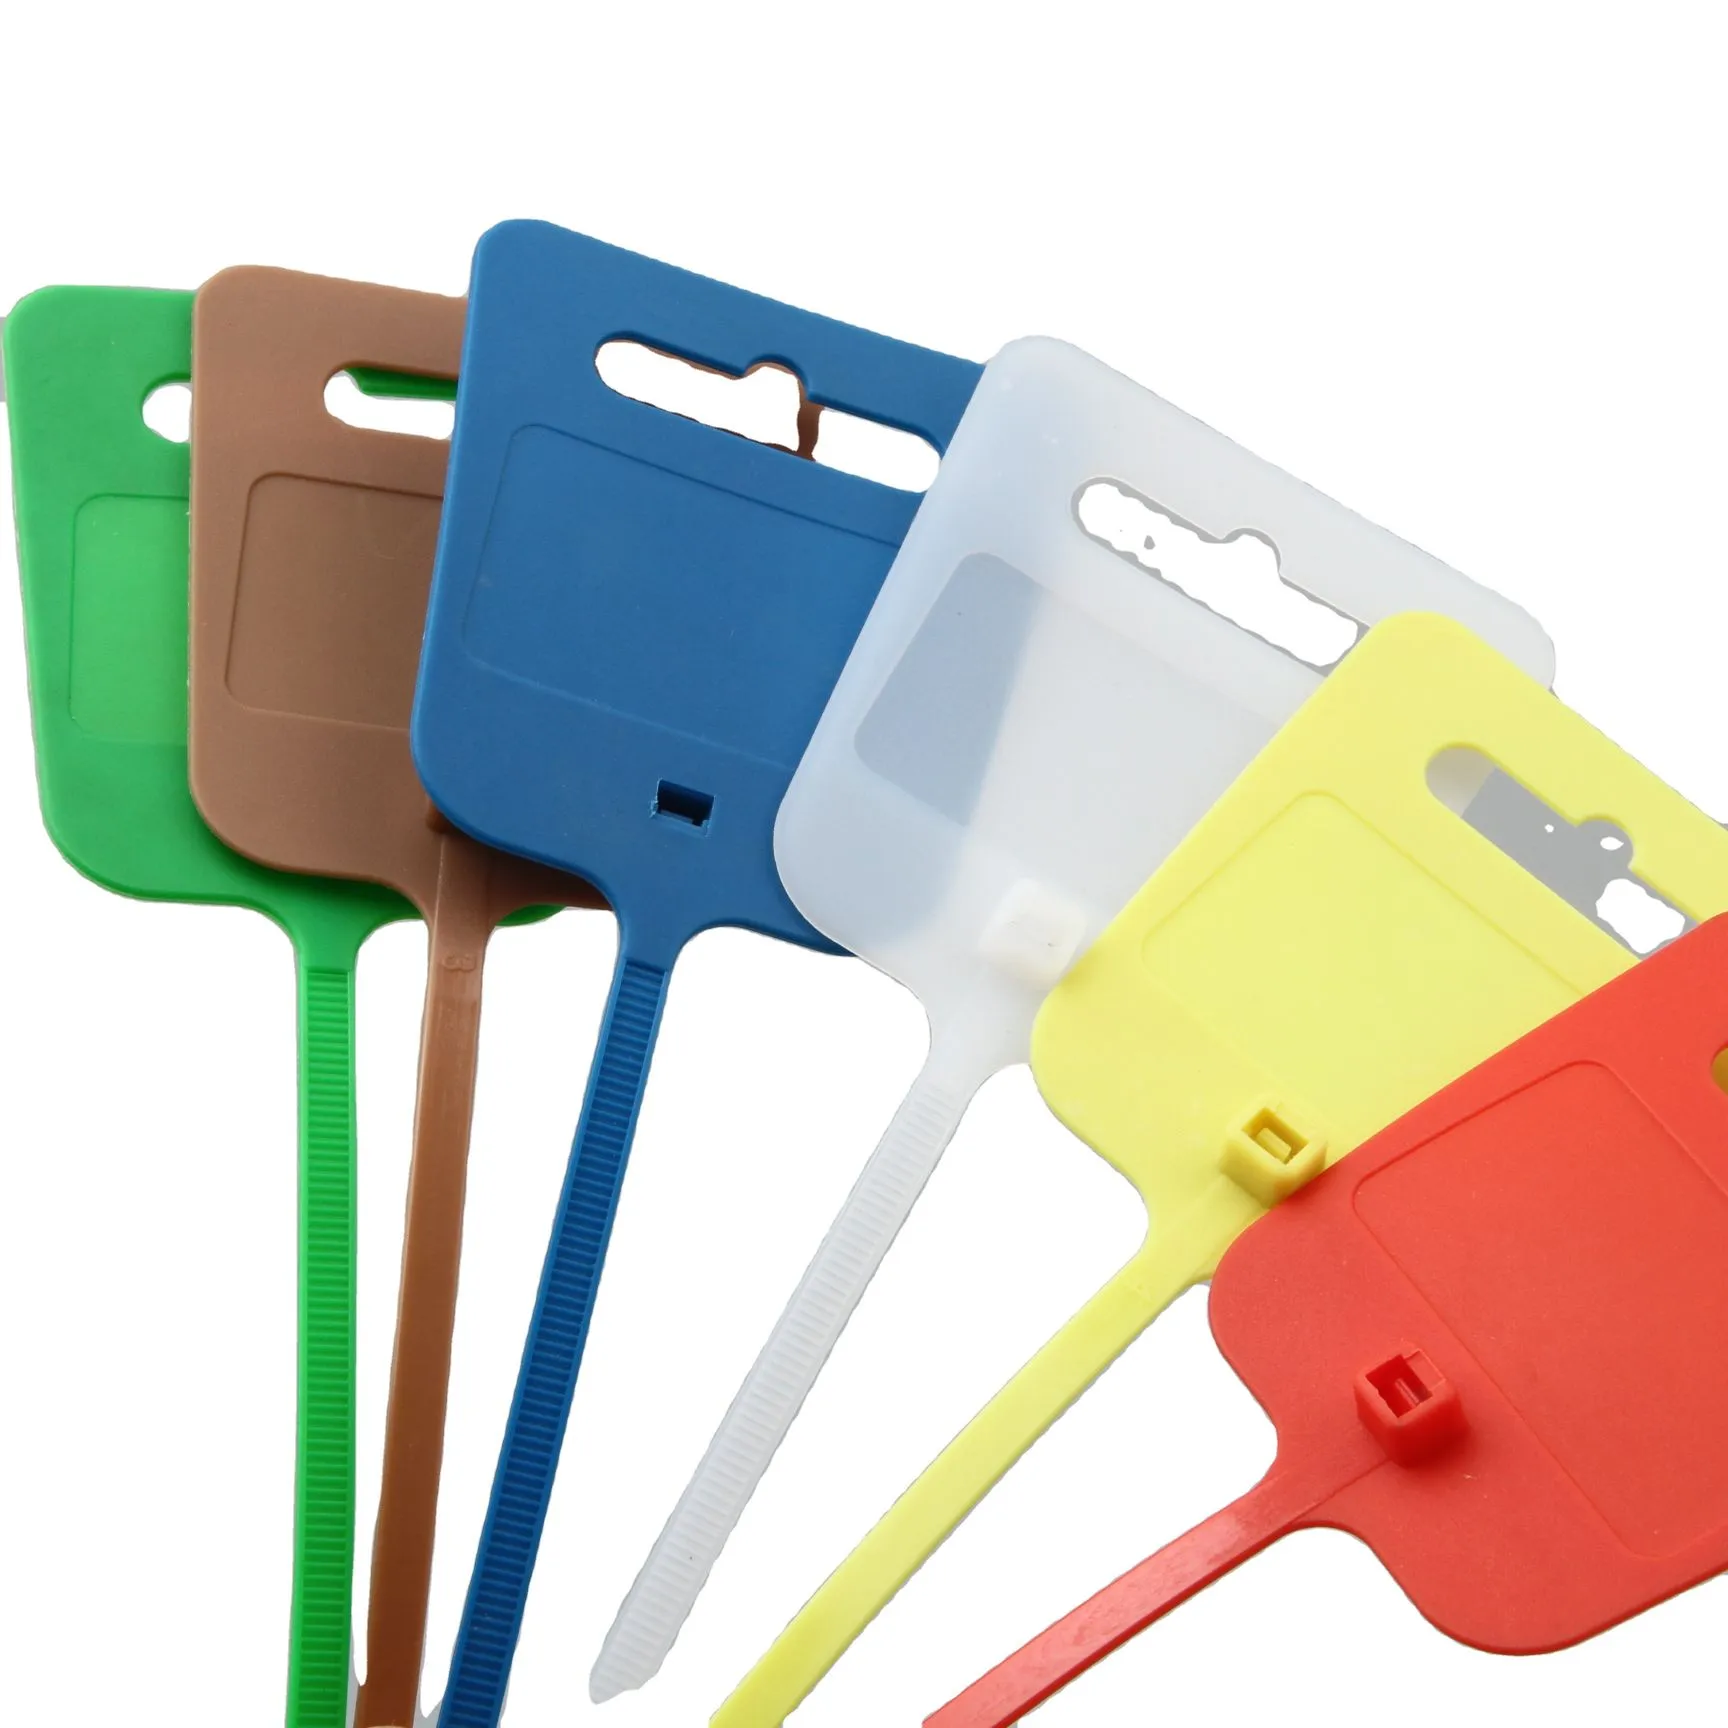 Weatherability cable ties